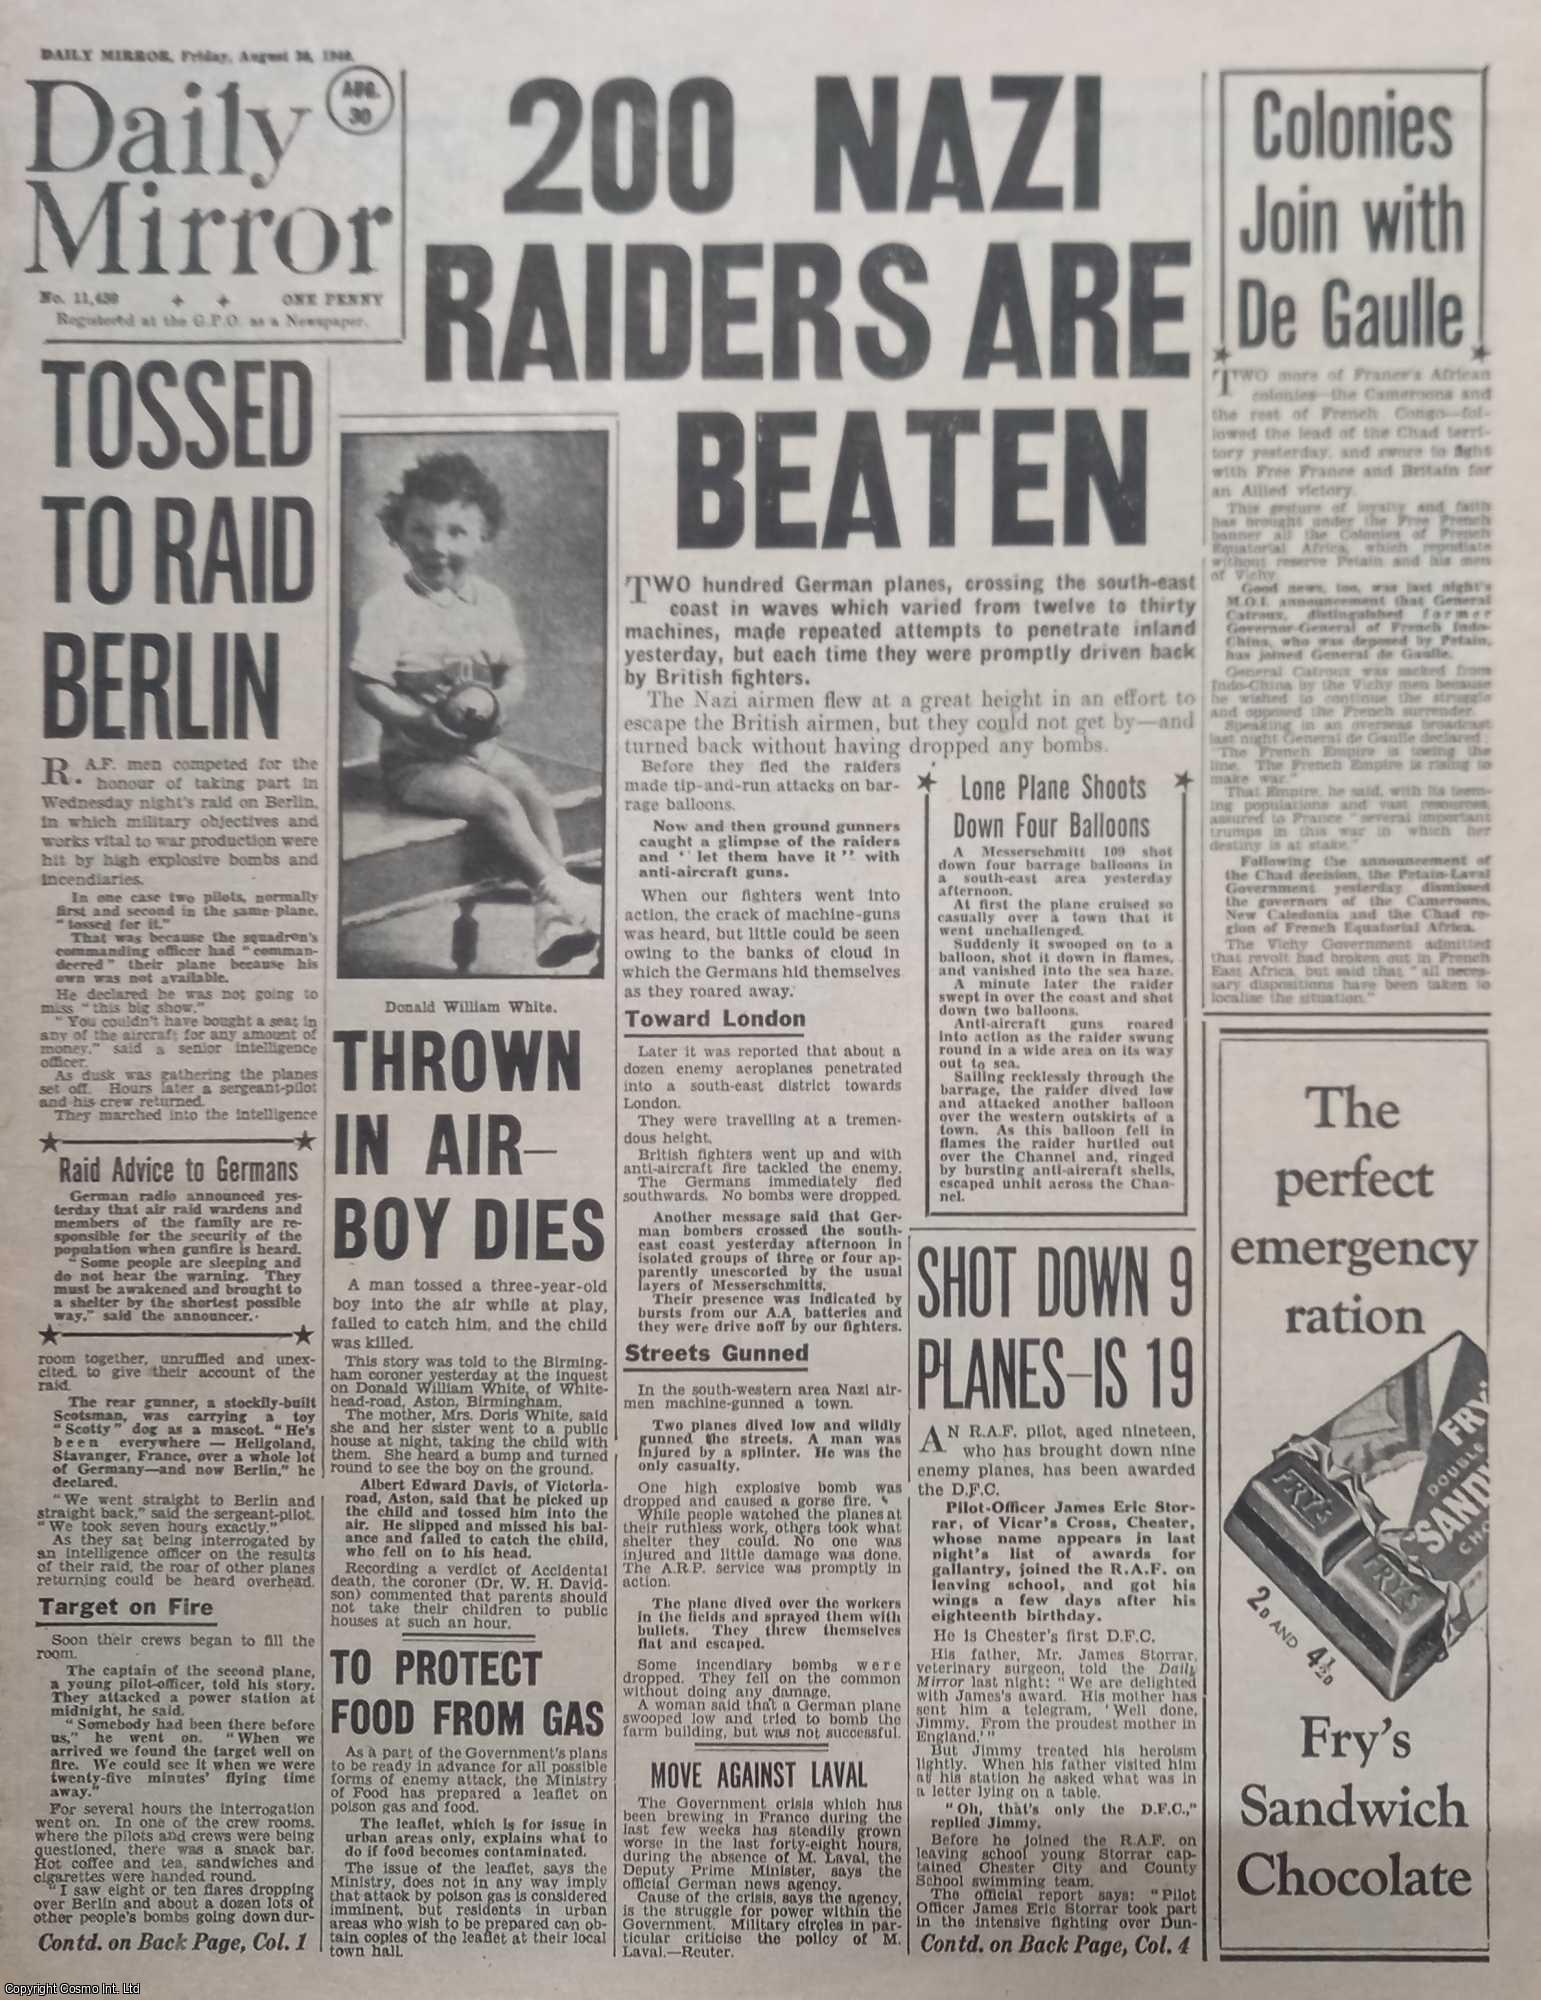 WORLD WAR TWO - 200 Nazis Raiders Are Beaten. The Daily Mirror, August 30, 1940. A modern reprint of the entire WW2 newspaper.